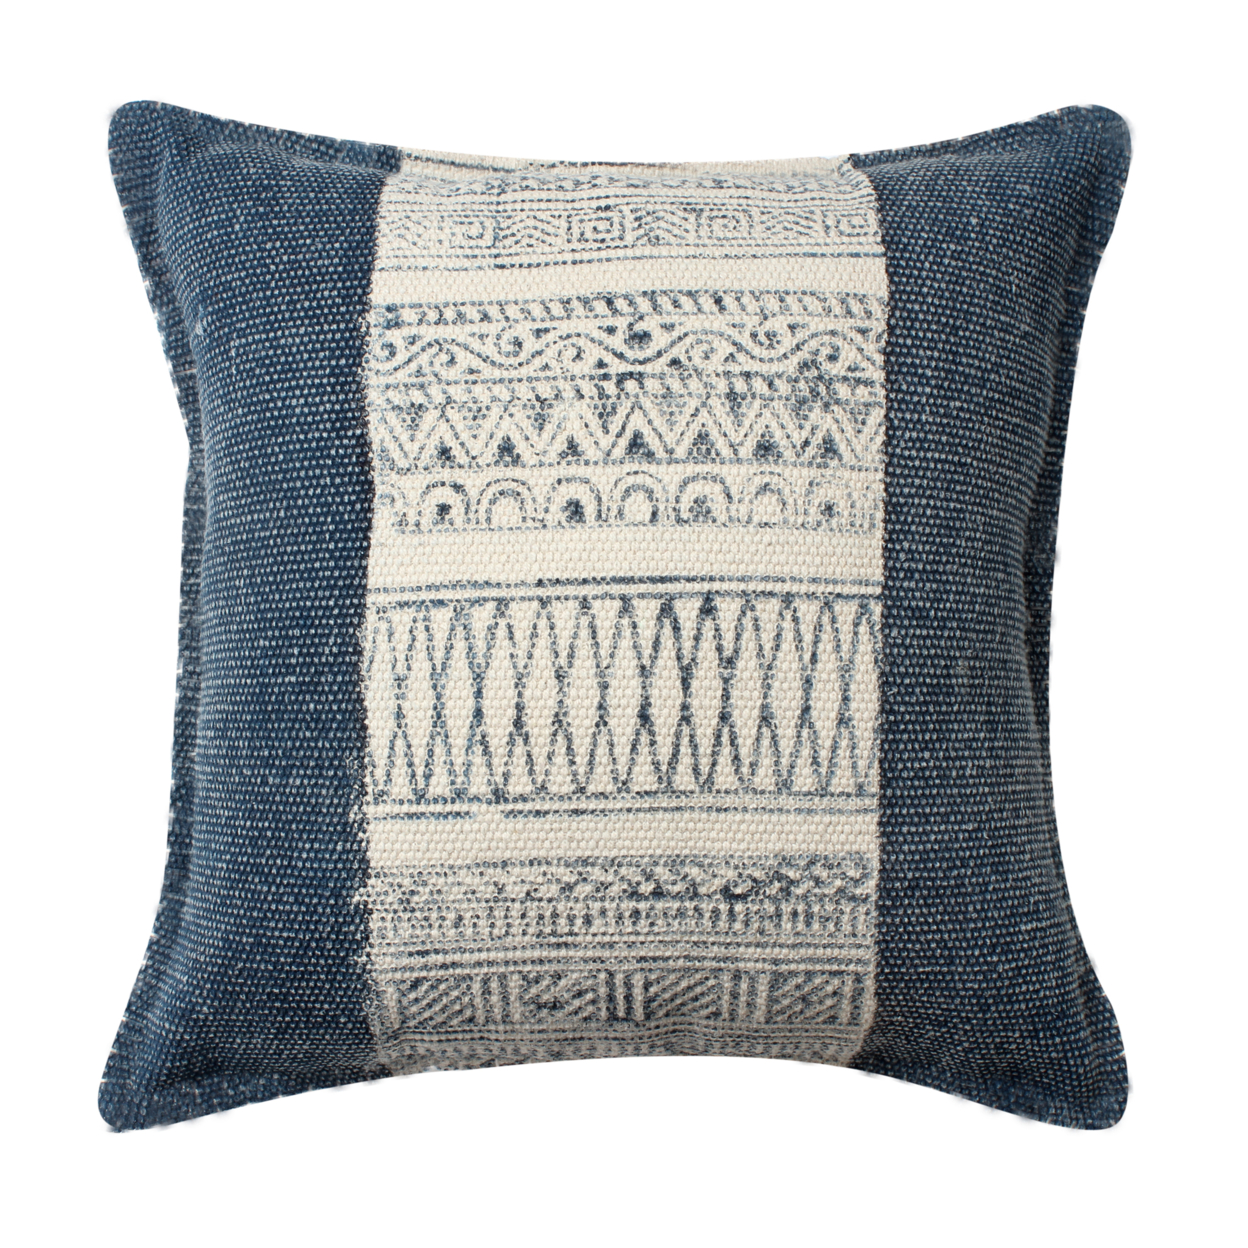 18 X 18 Square Handwoven Accent Throw Pillow, Polycotton Dhurrie, Kilim Pattern, Set Of 2, White, Blue